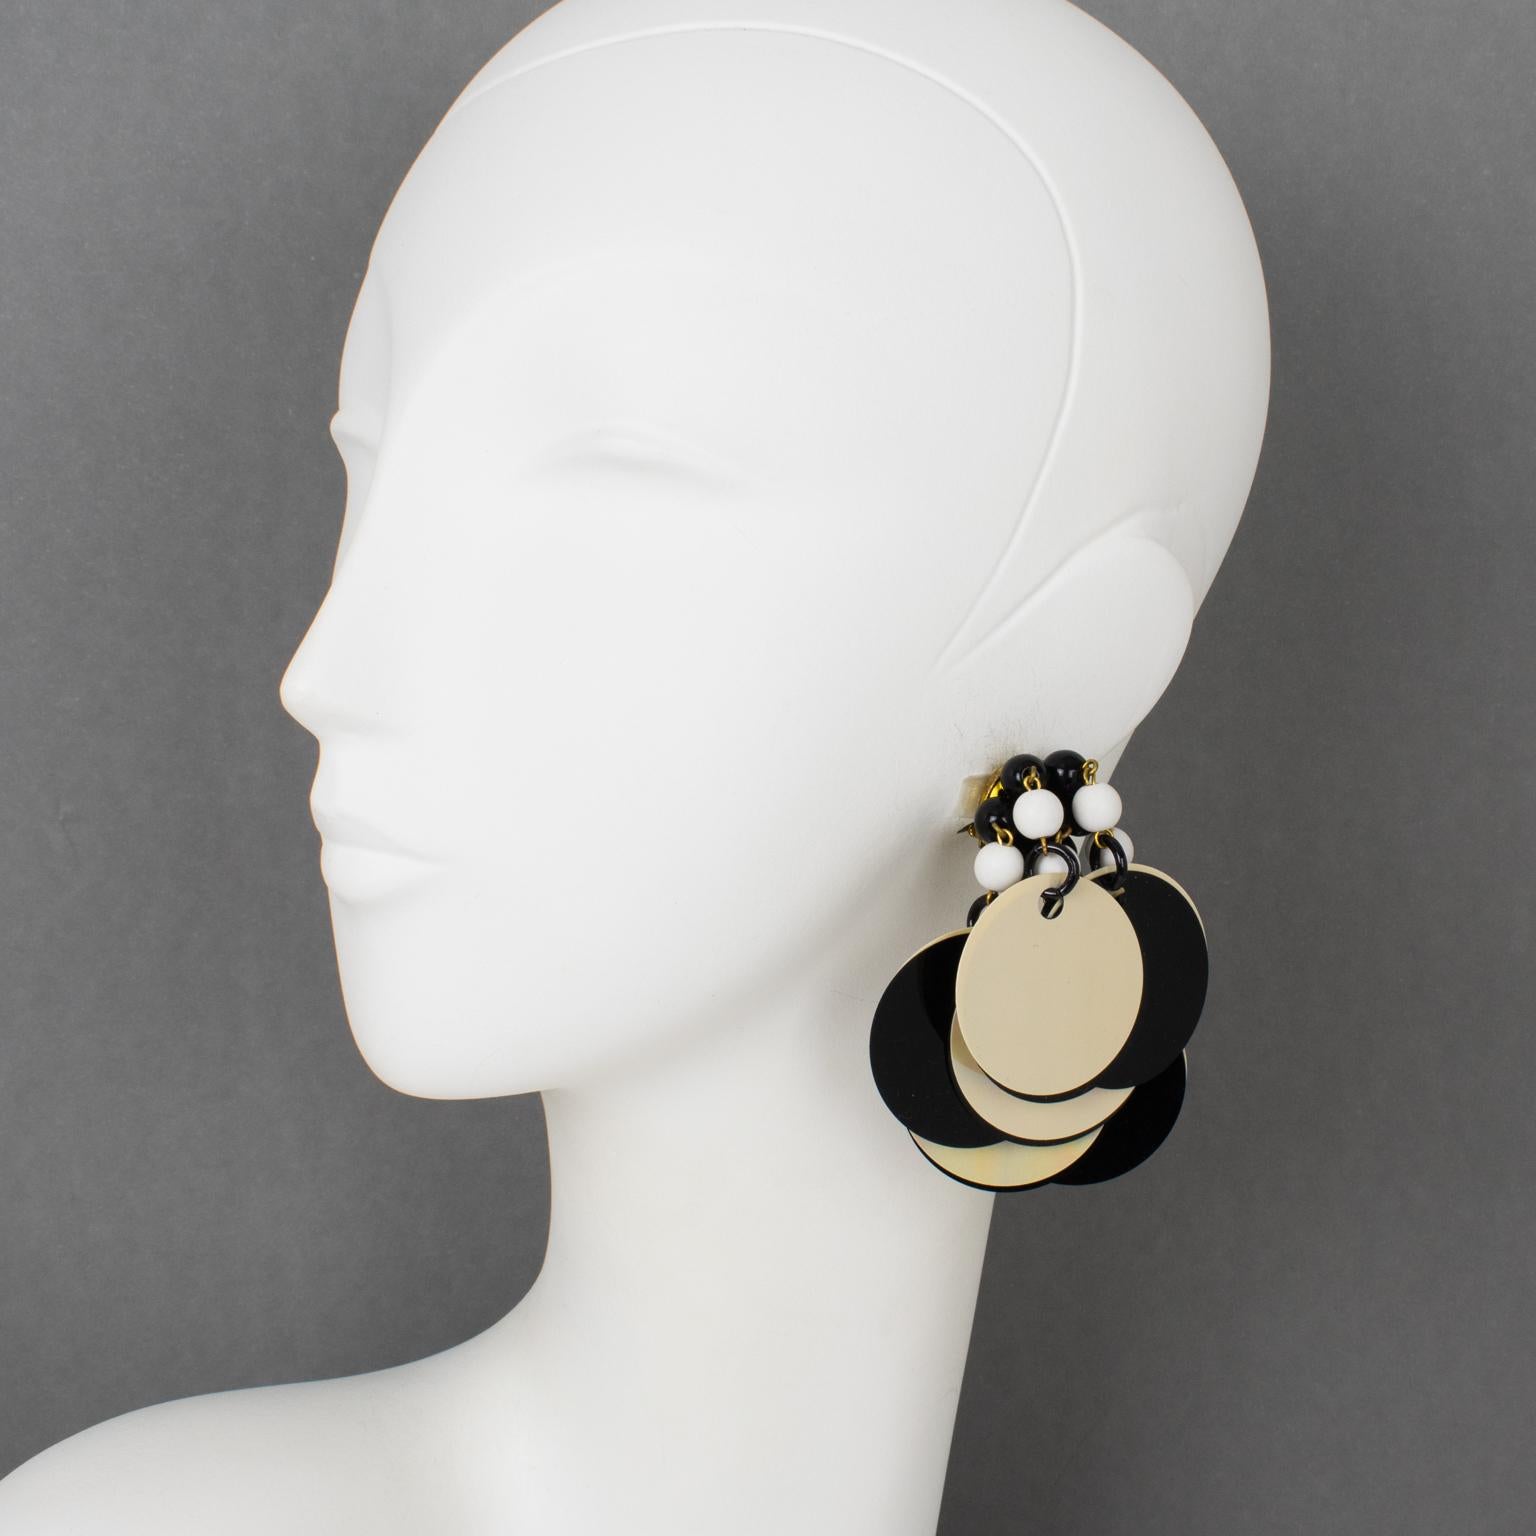 These superb dangling clip-on earrings were crafted in the 1960s in Italy. They feature a dangle drop design built with oversized rhodoid sequin disks in black and Aurora Borealis AB colors. The gilded metal hardware is embellished with black and